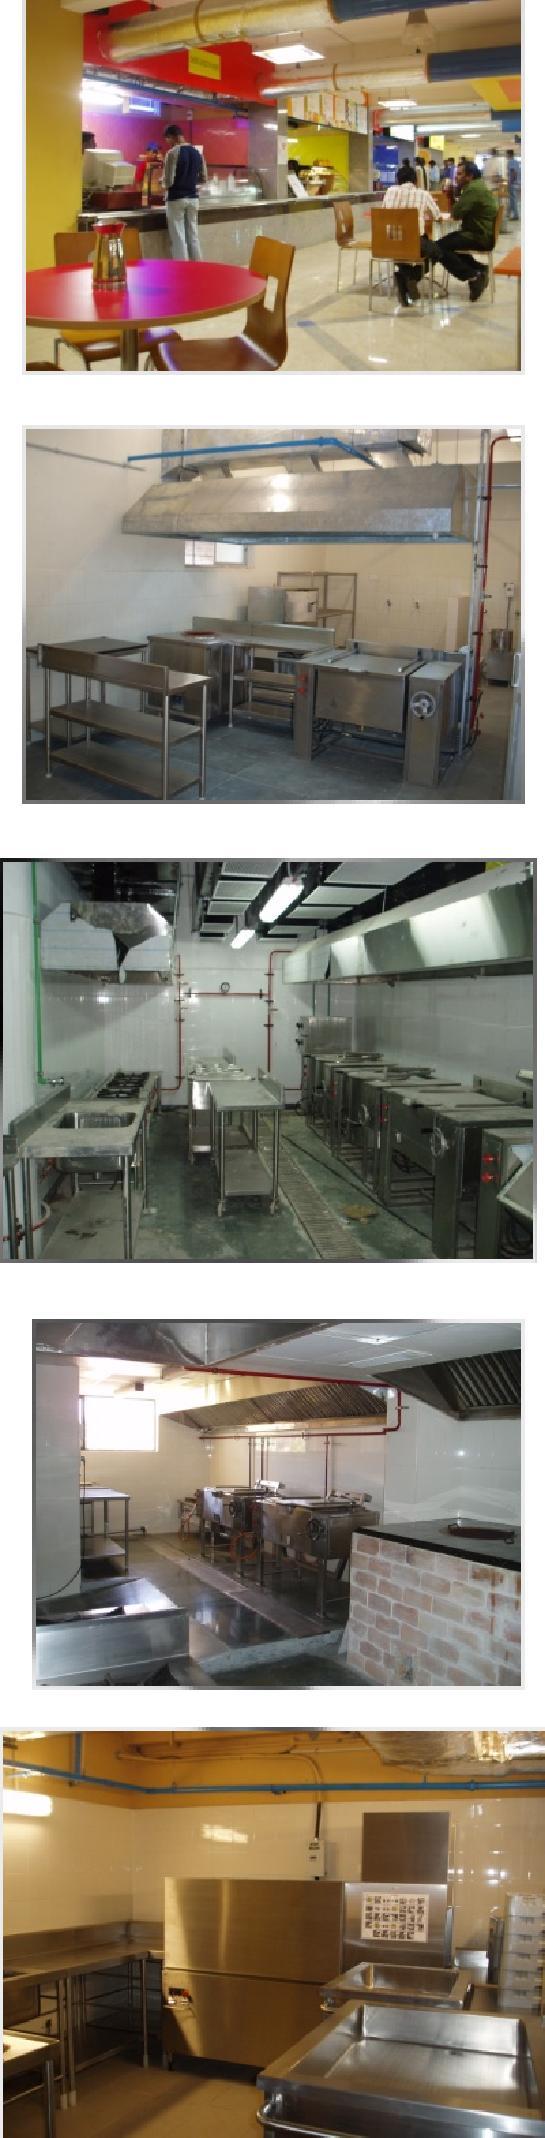 Applications F & B Facility Planning Our Principal Associate, Ignatius John, has been specializing in facility planning and design of food service facilities for various institutions in the recent